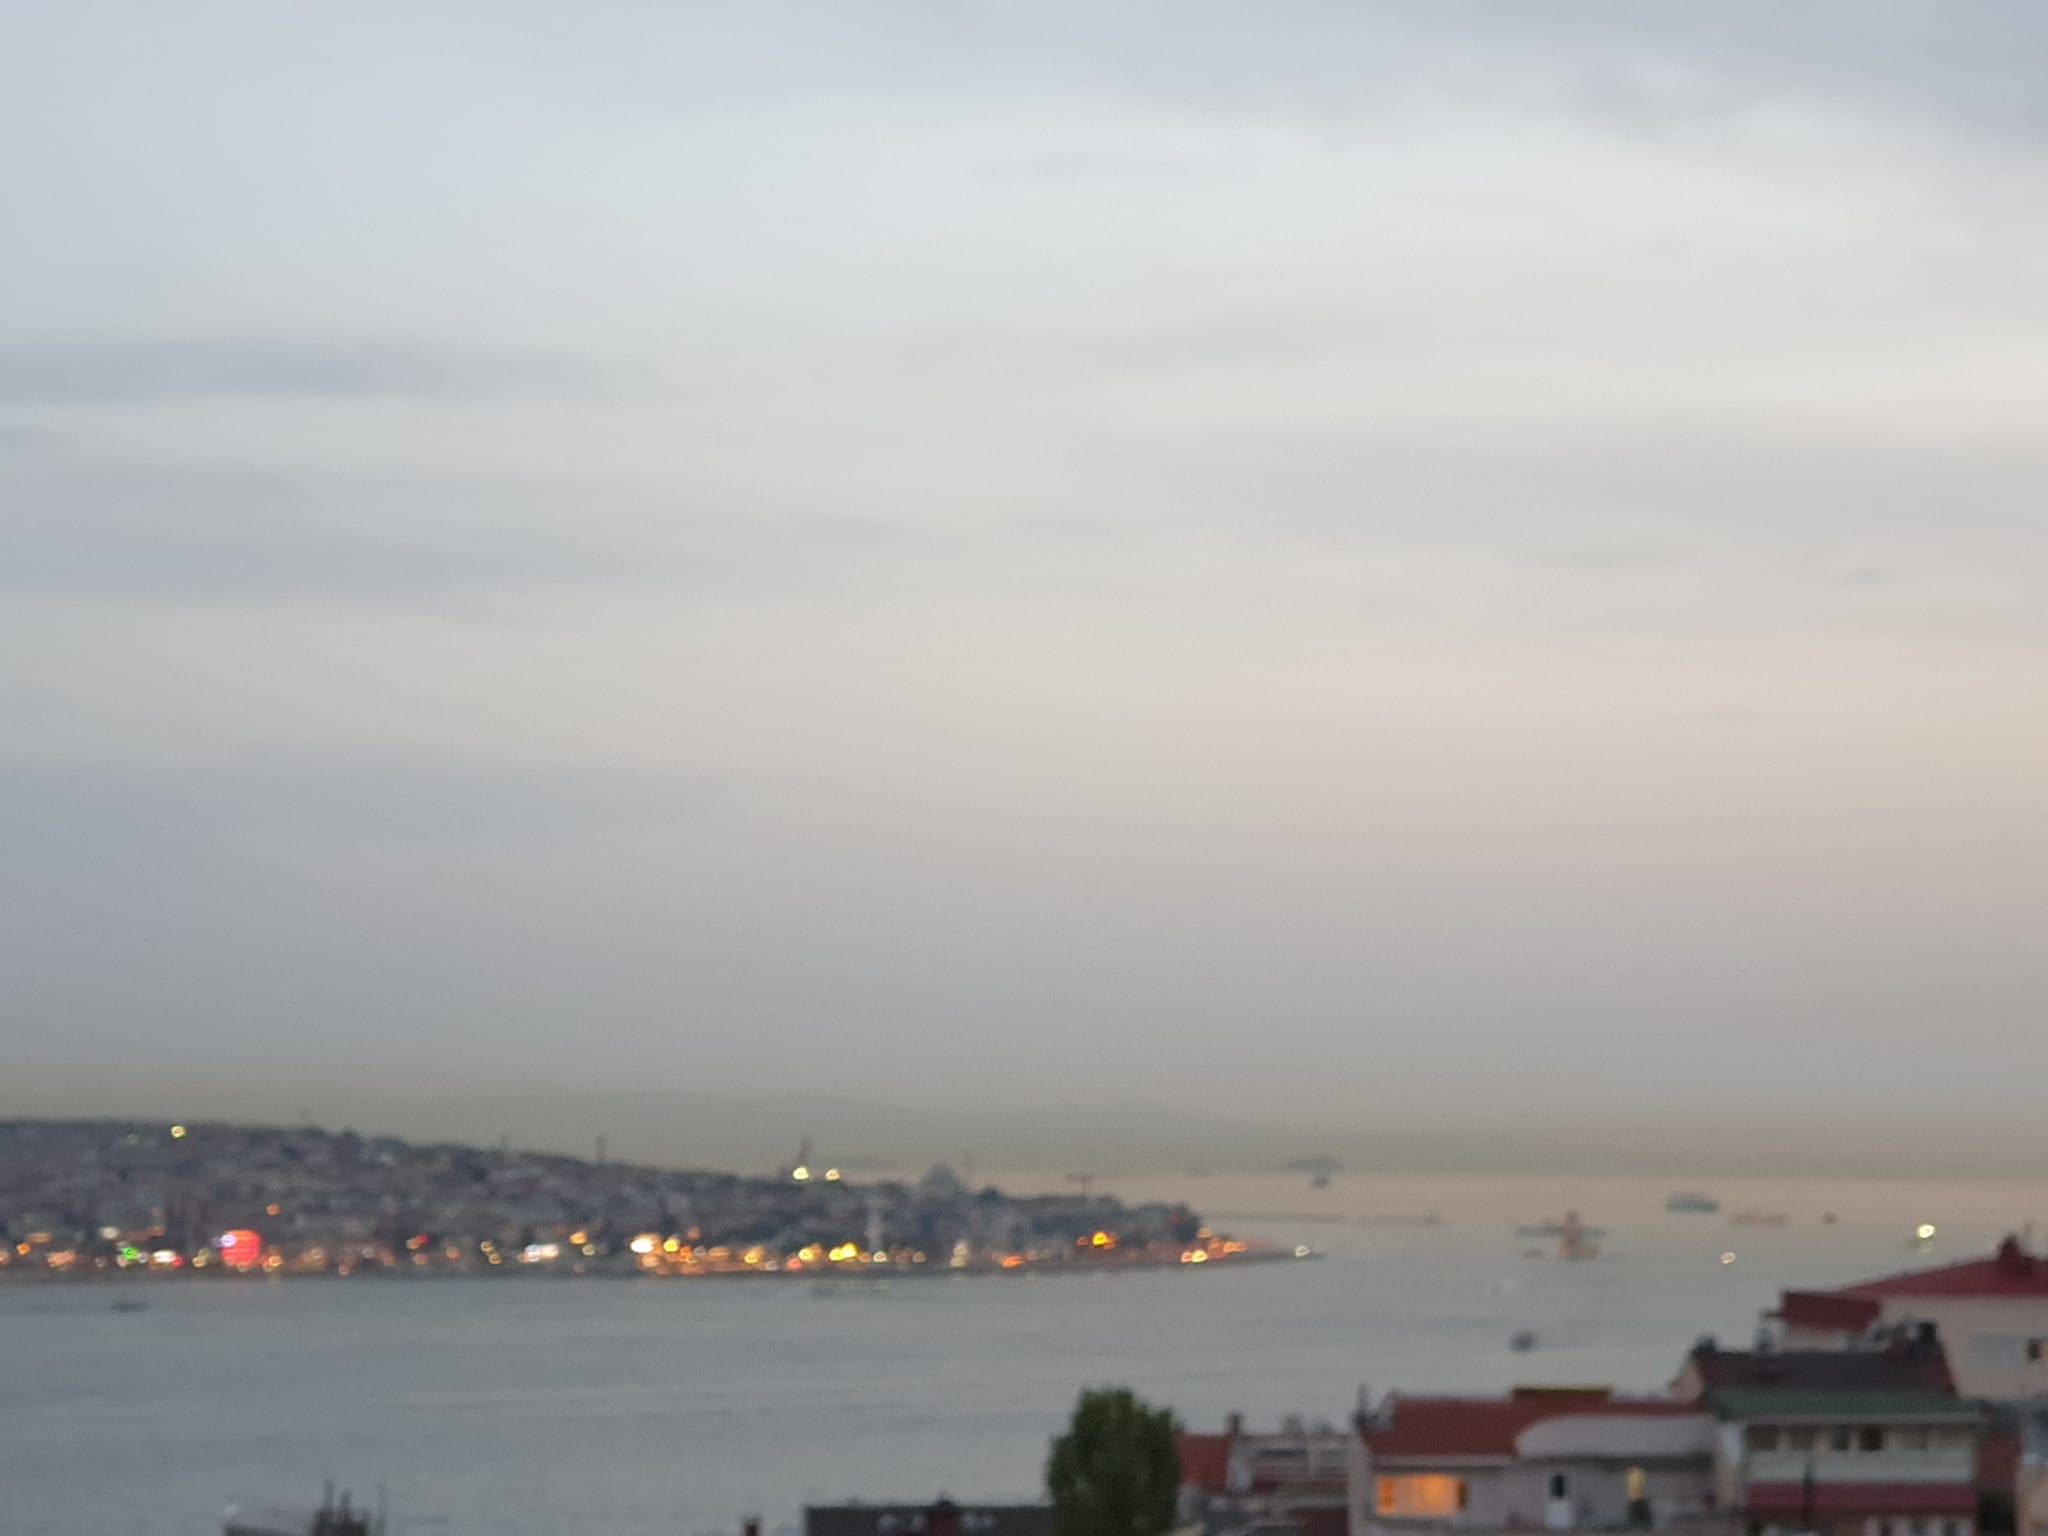 For Sale With Stunning Bosphorus Panoramic View